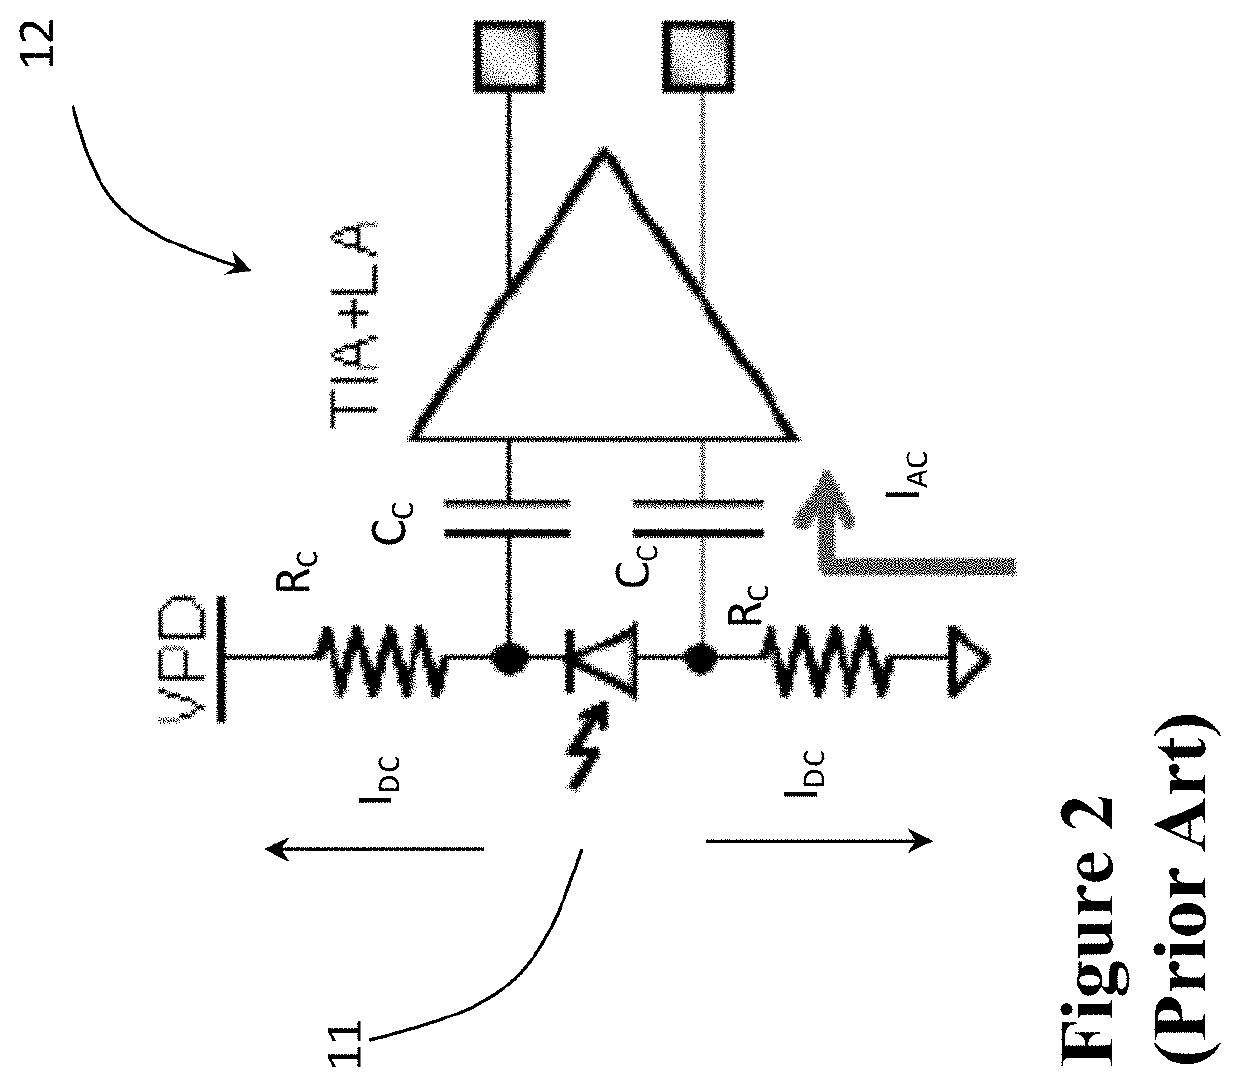 Differential trans-impedance amplifier